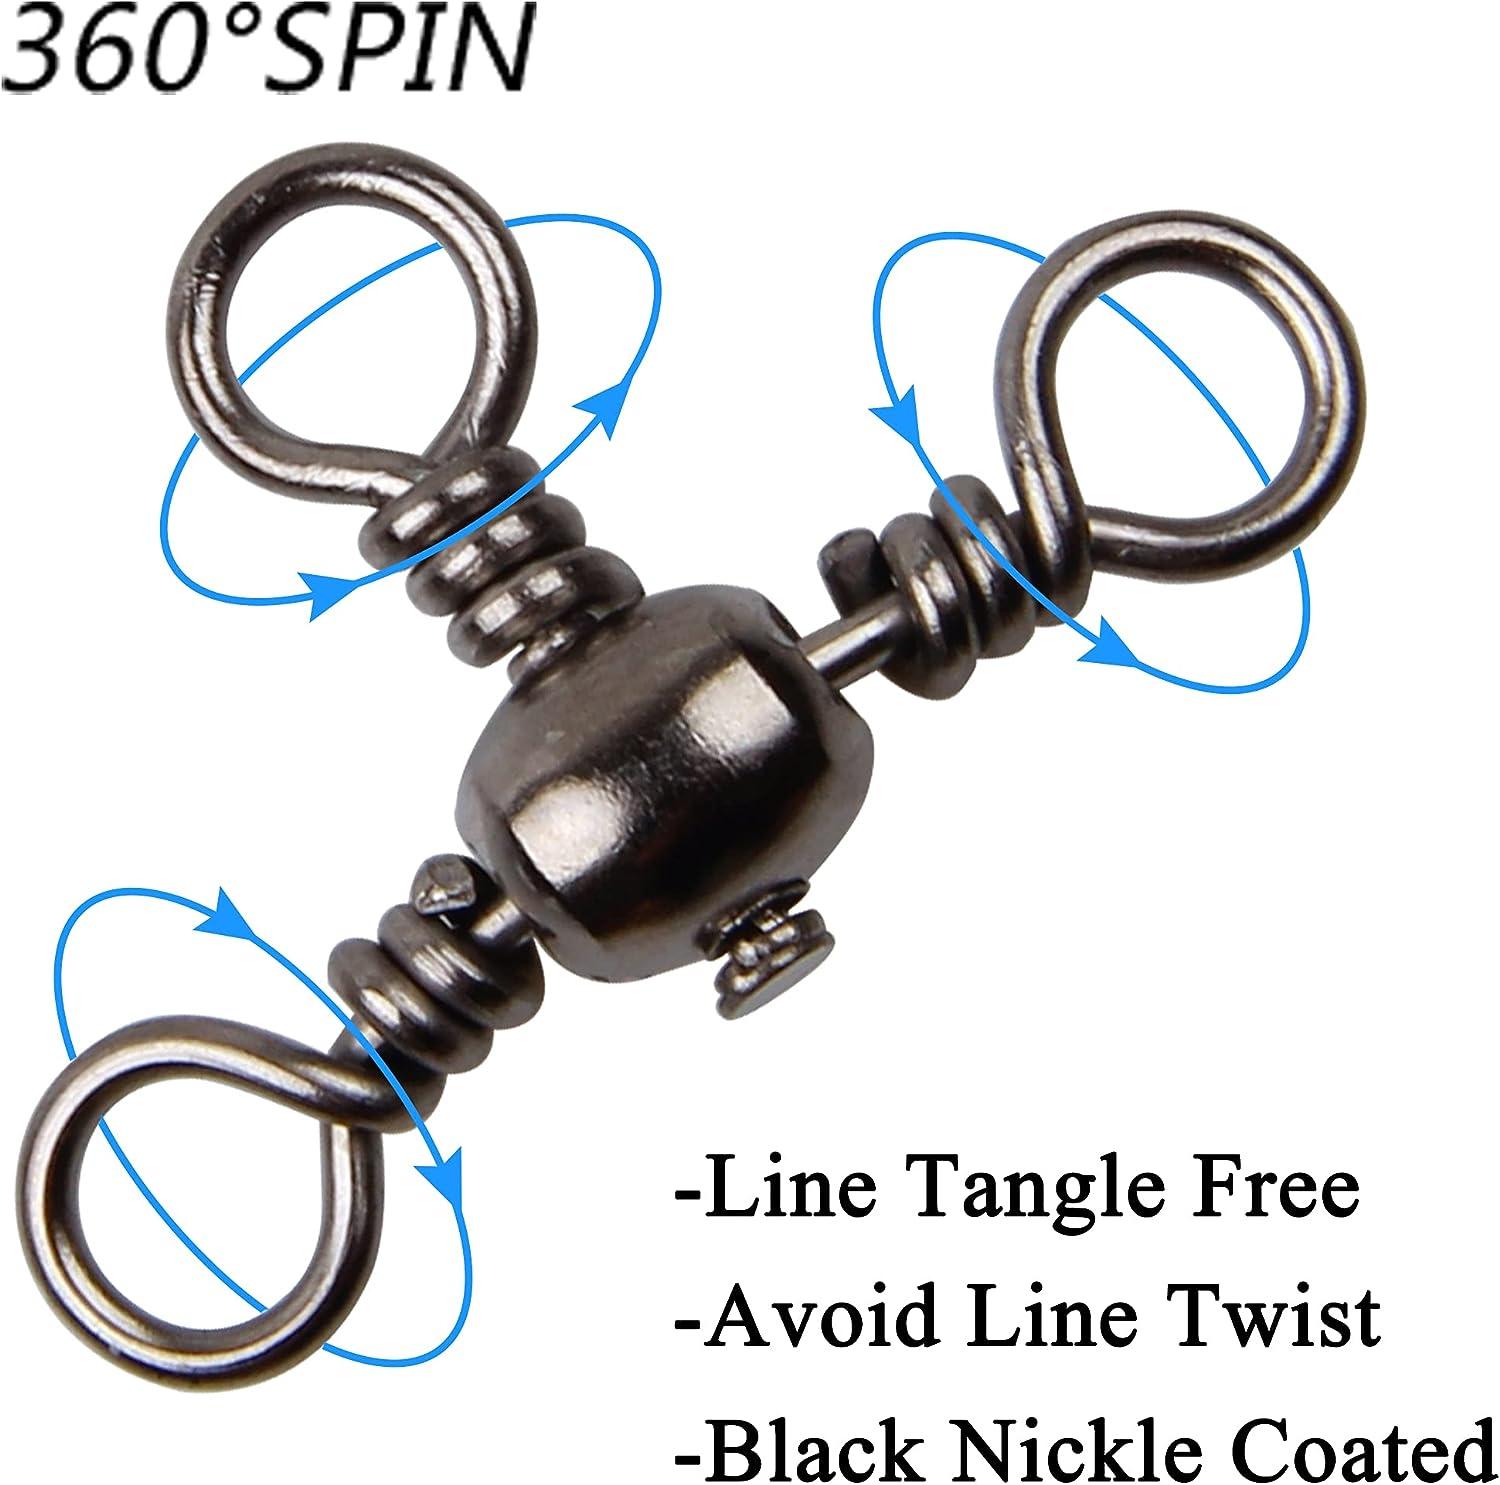 3 Way Barrel Cross Line Fishing Swivel with Solid Ring Connector